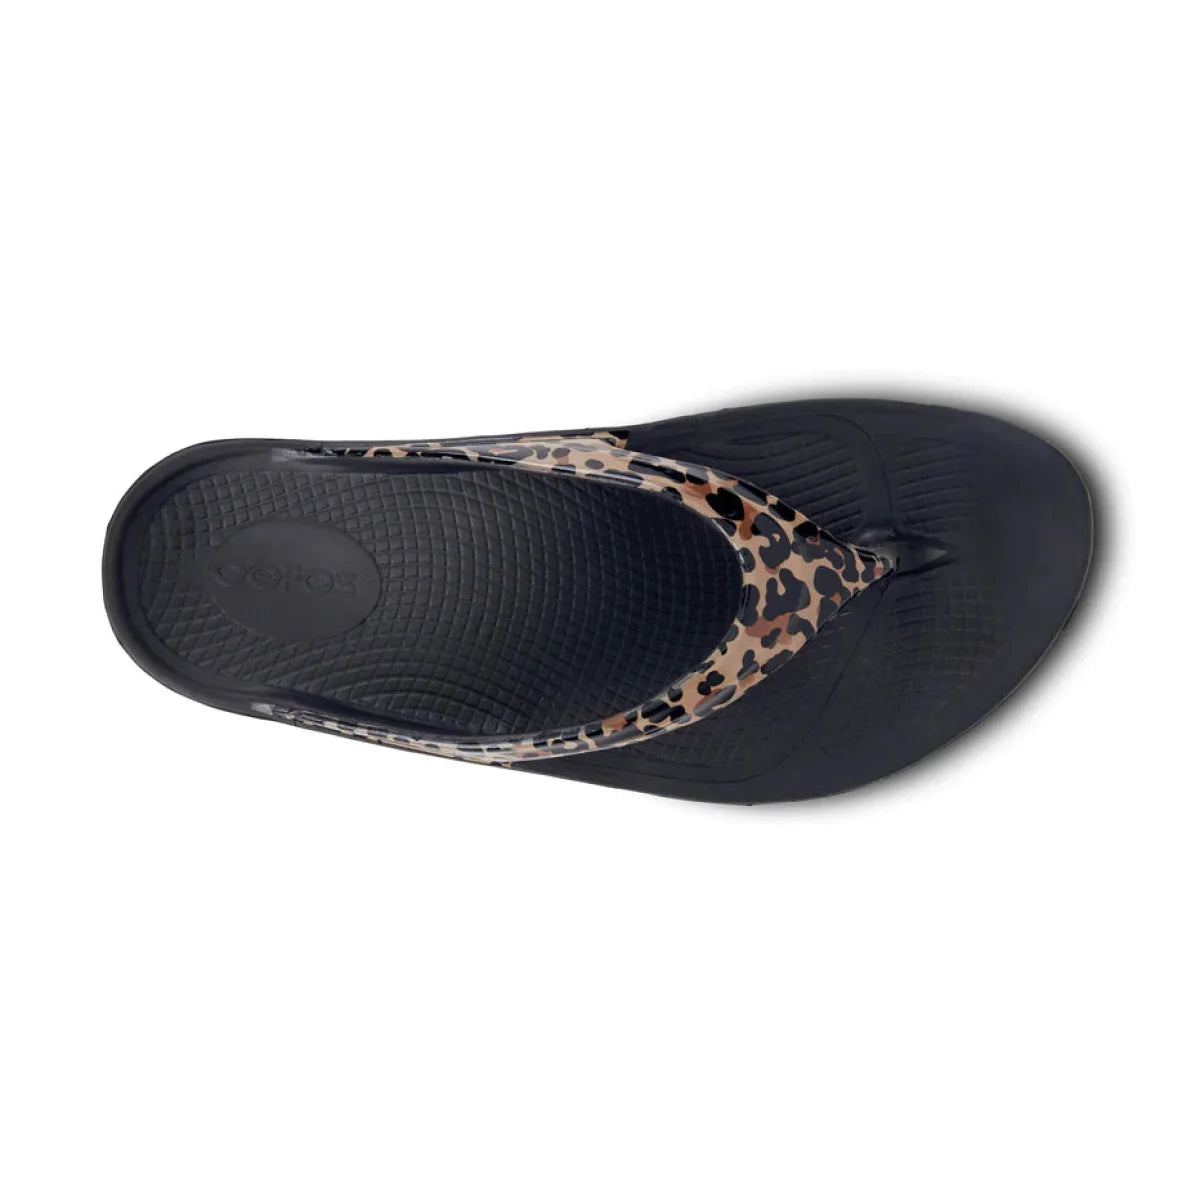 Women's OOFOS OOlala Limited Sandals